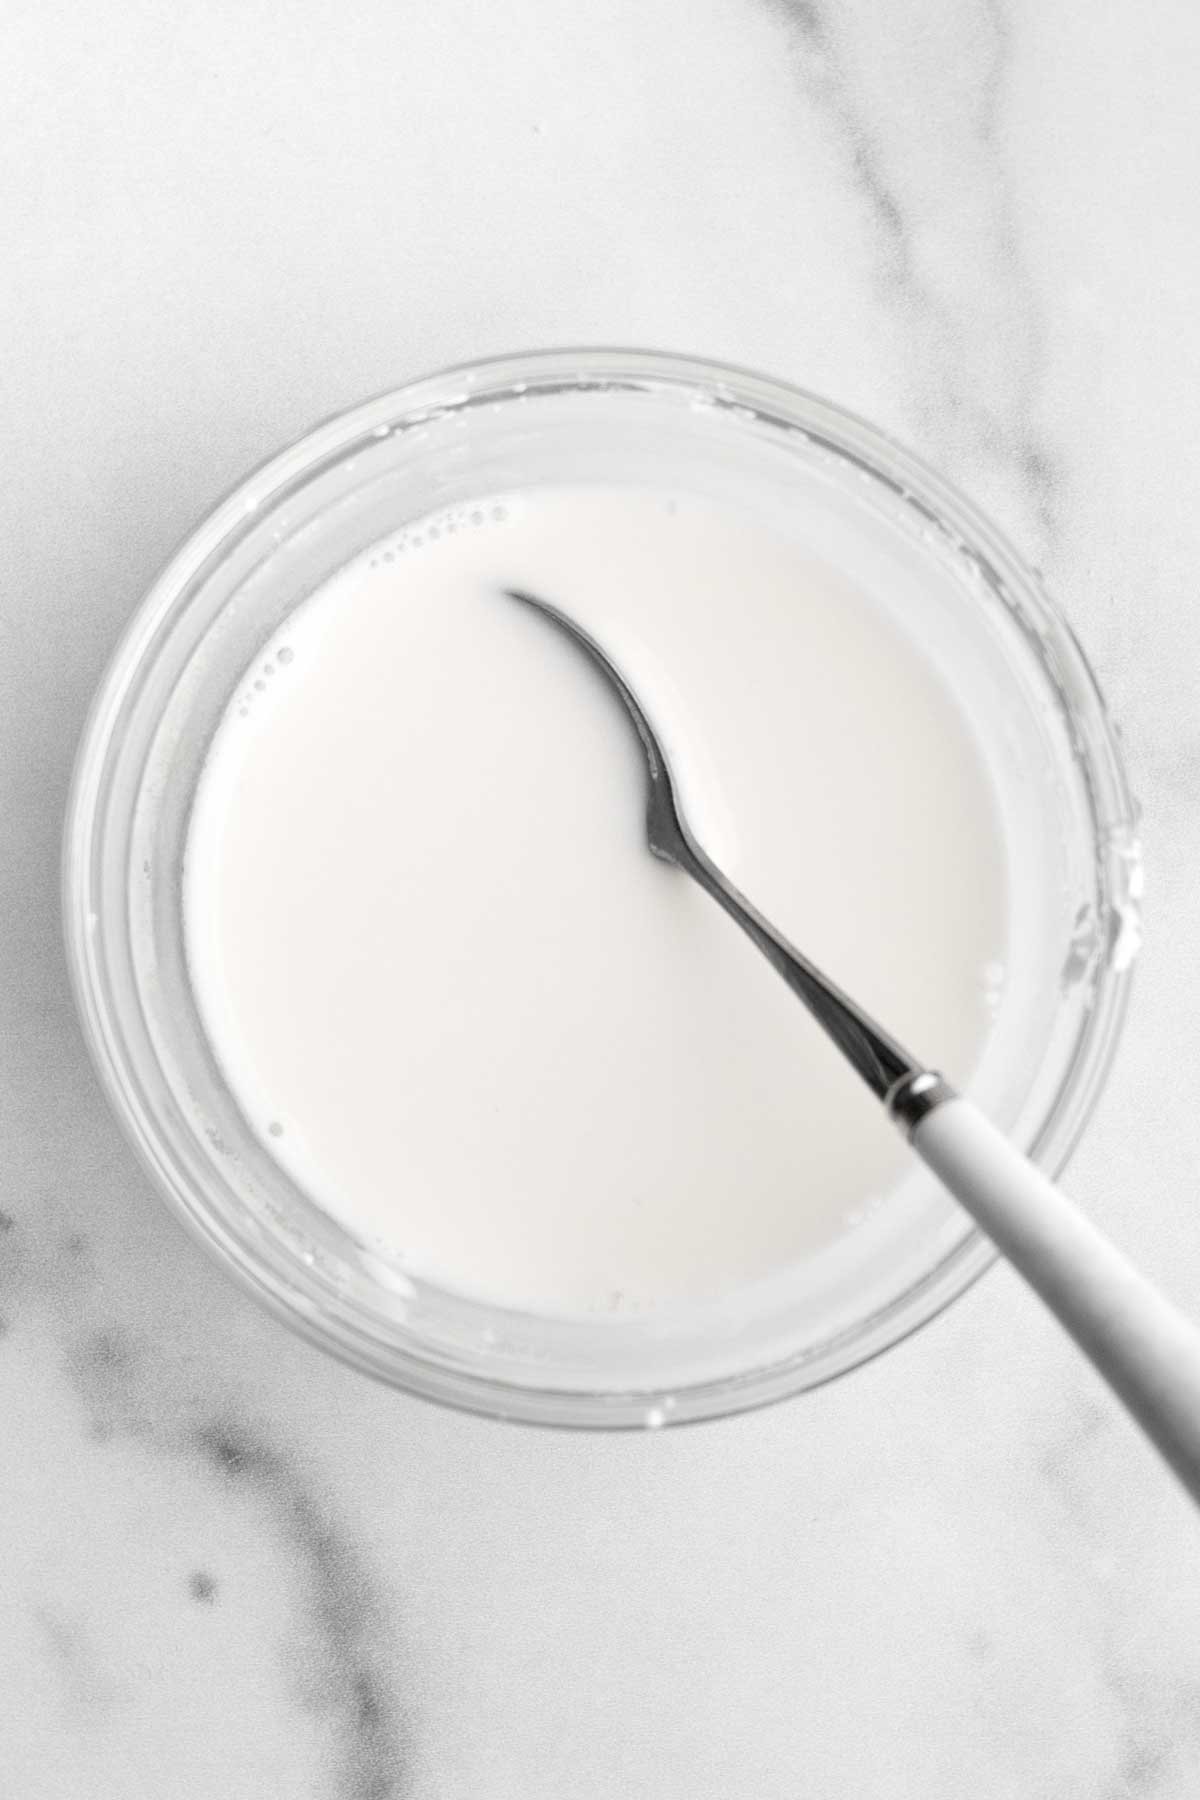 A bowl of white cornstarch water and a spoon.